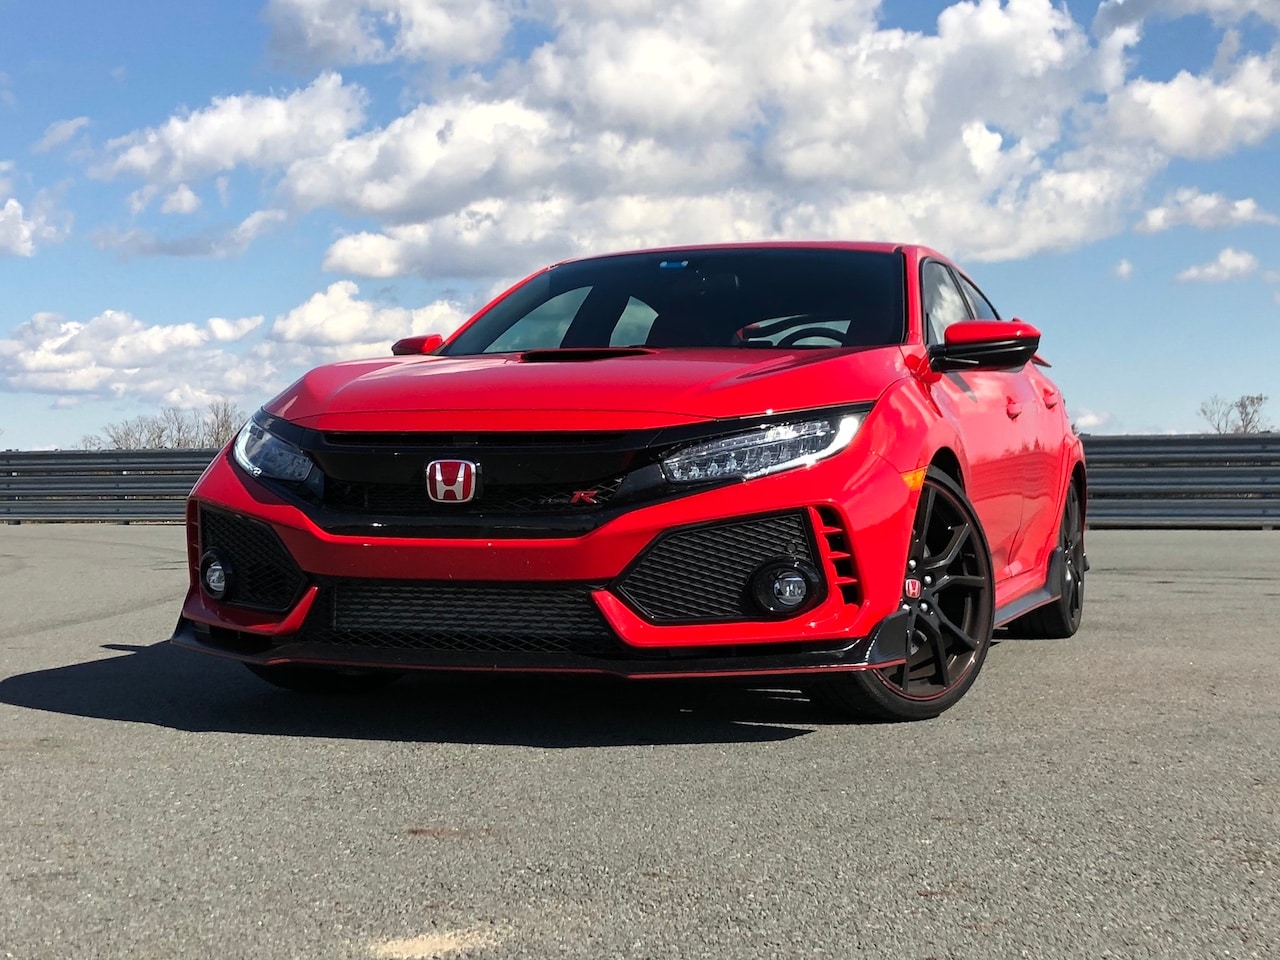 Exterior view of the 2019 Honda Civic Type R